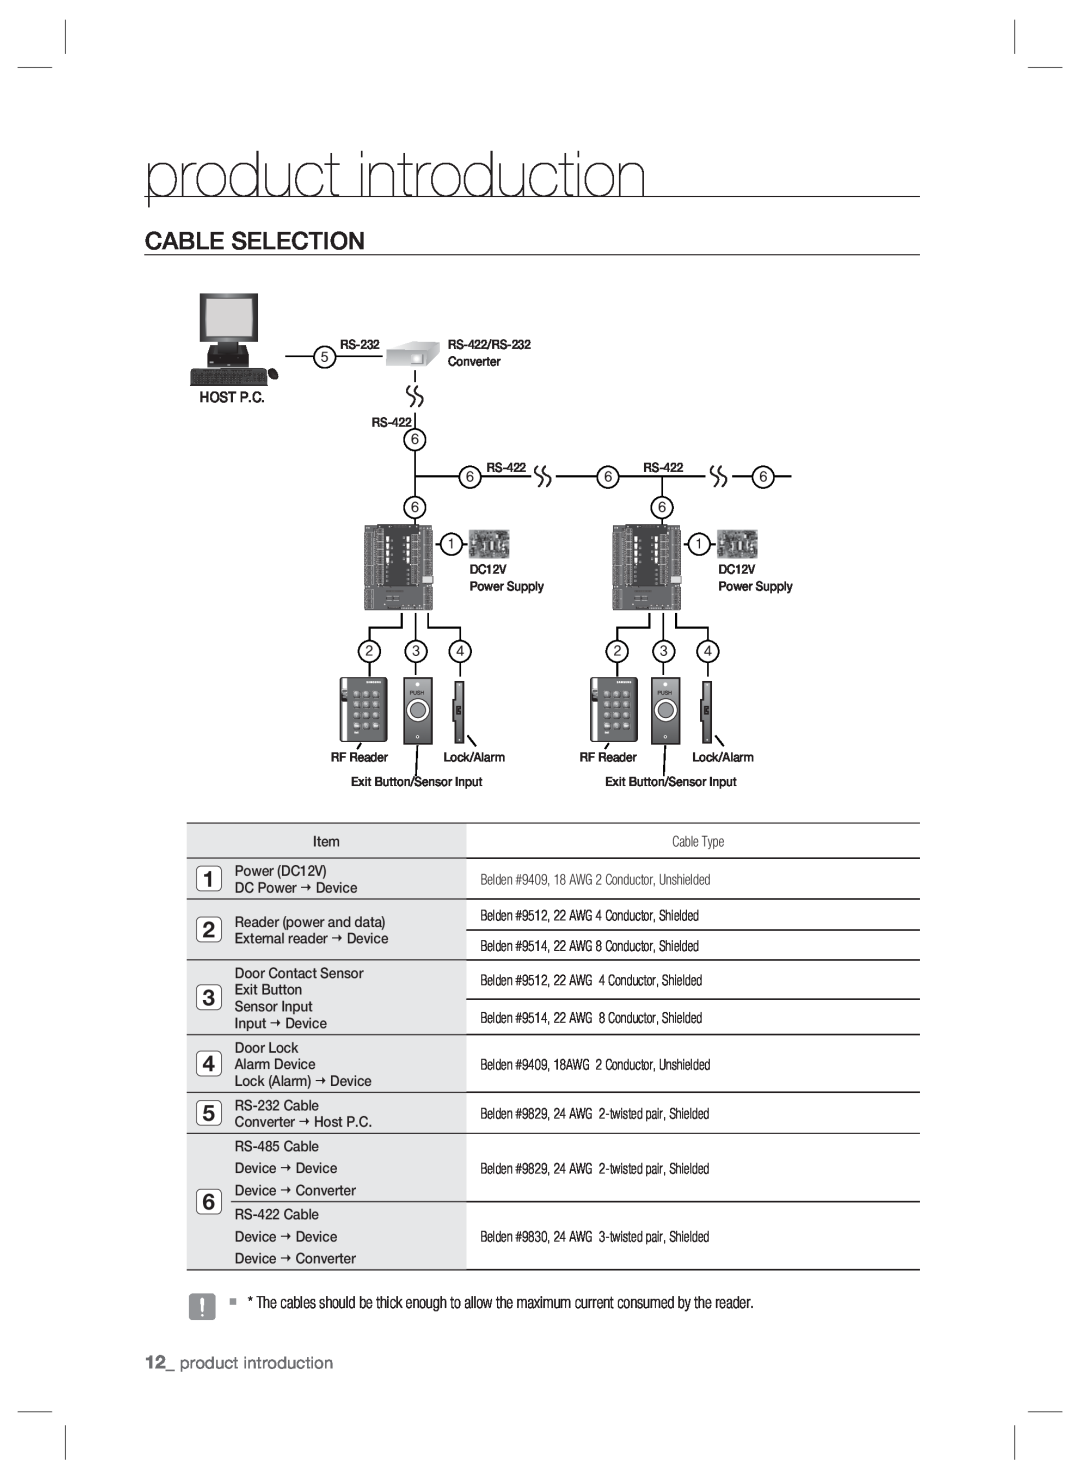 Samsung SSA-P400T, SSA-P401T user manual Cable Selection, product introduction 